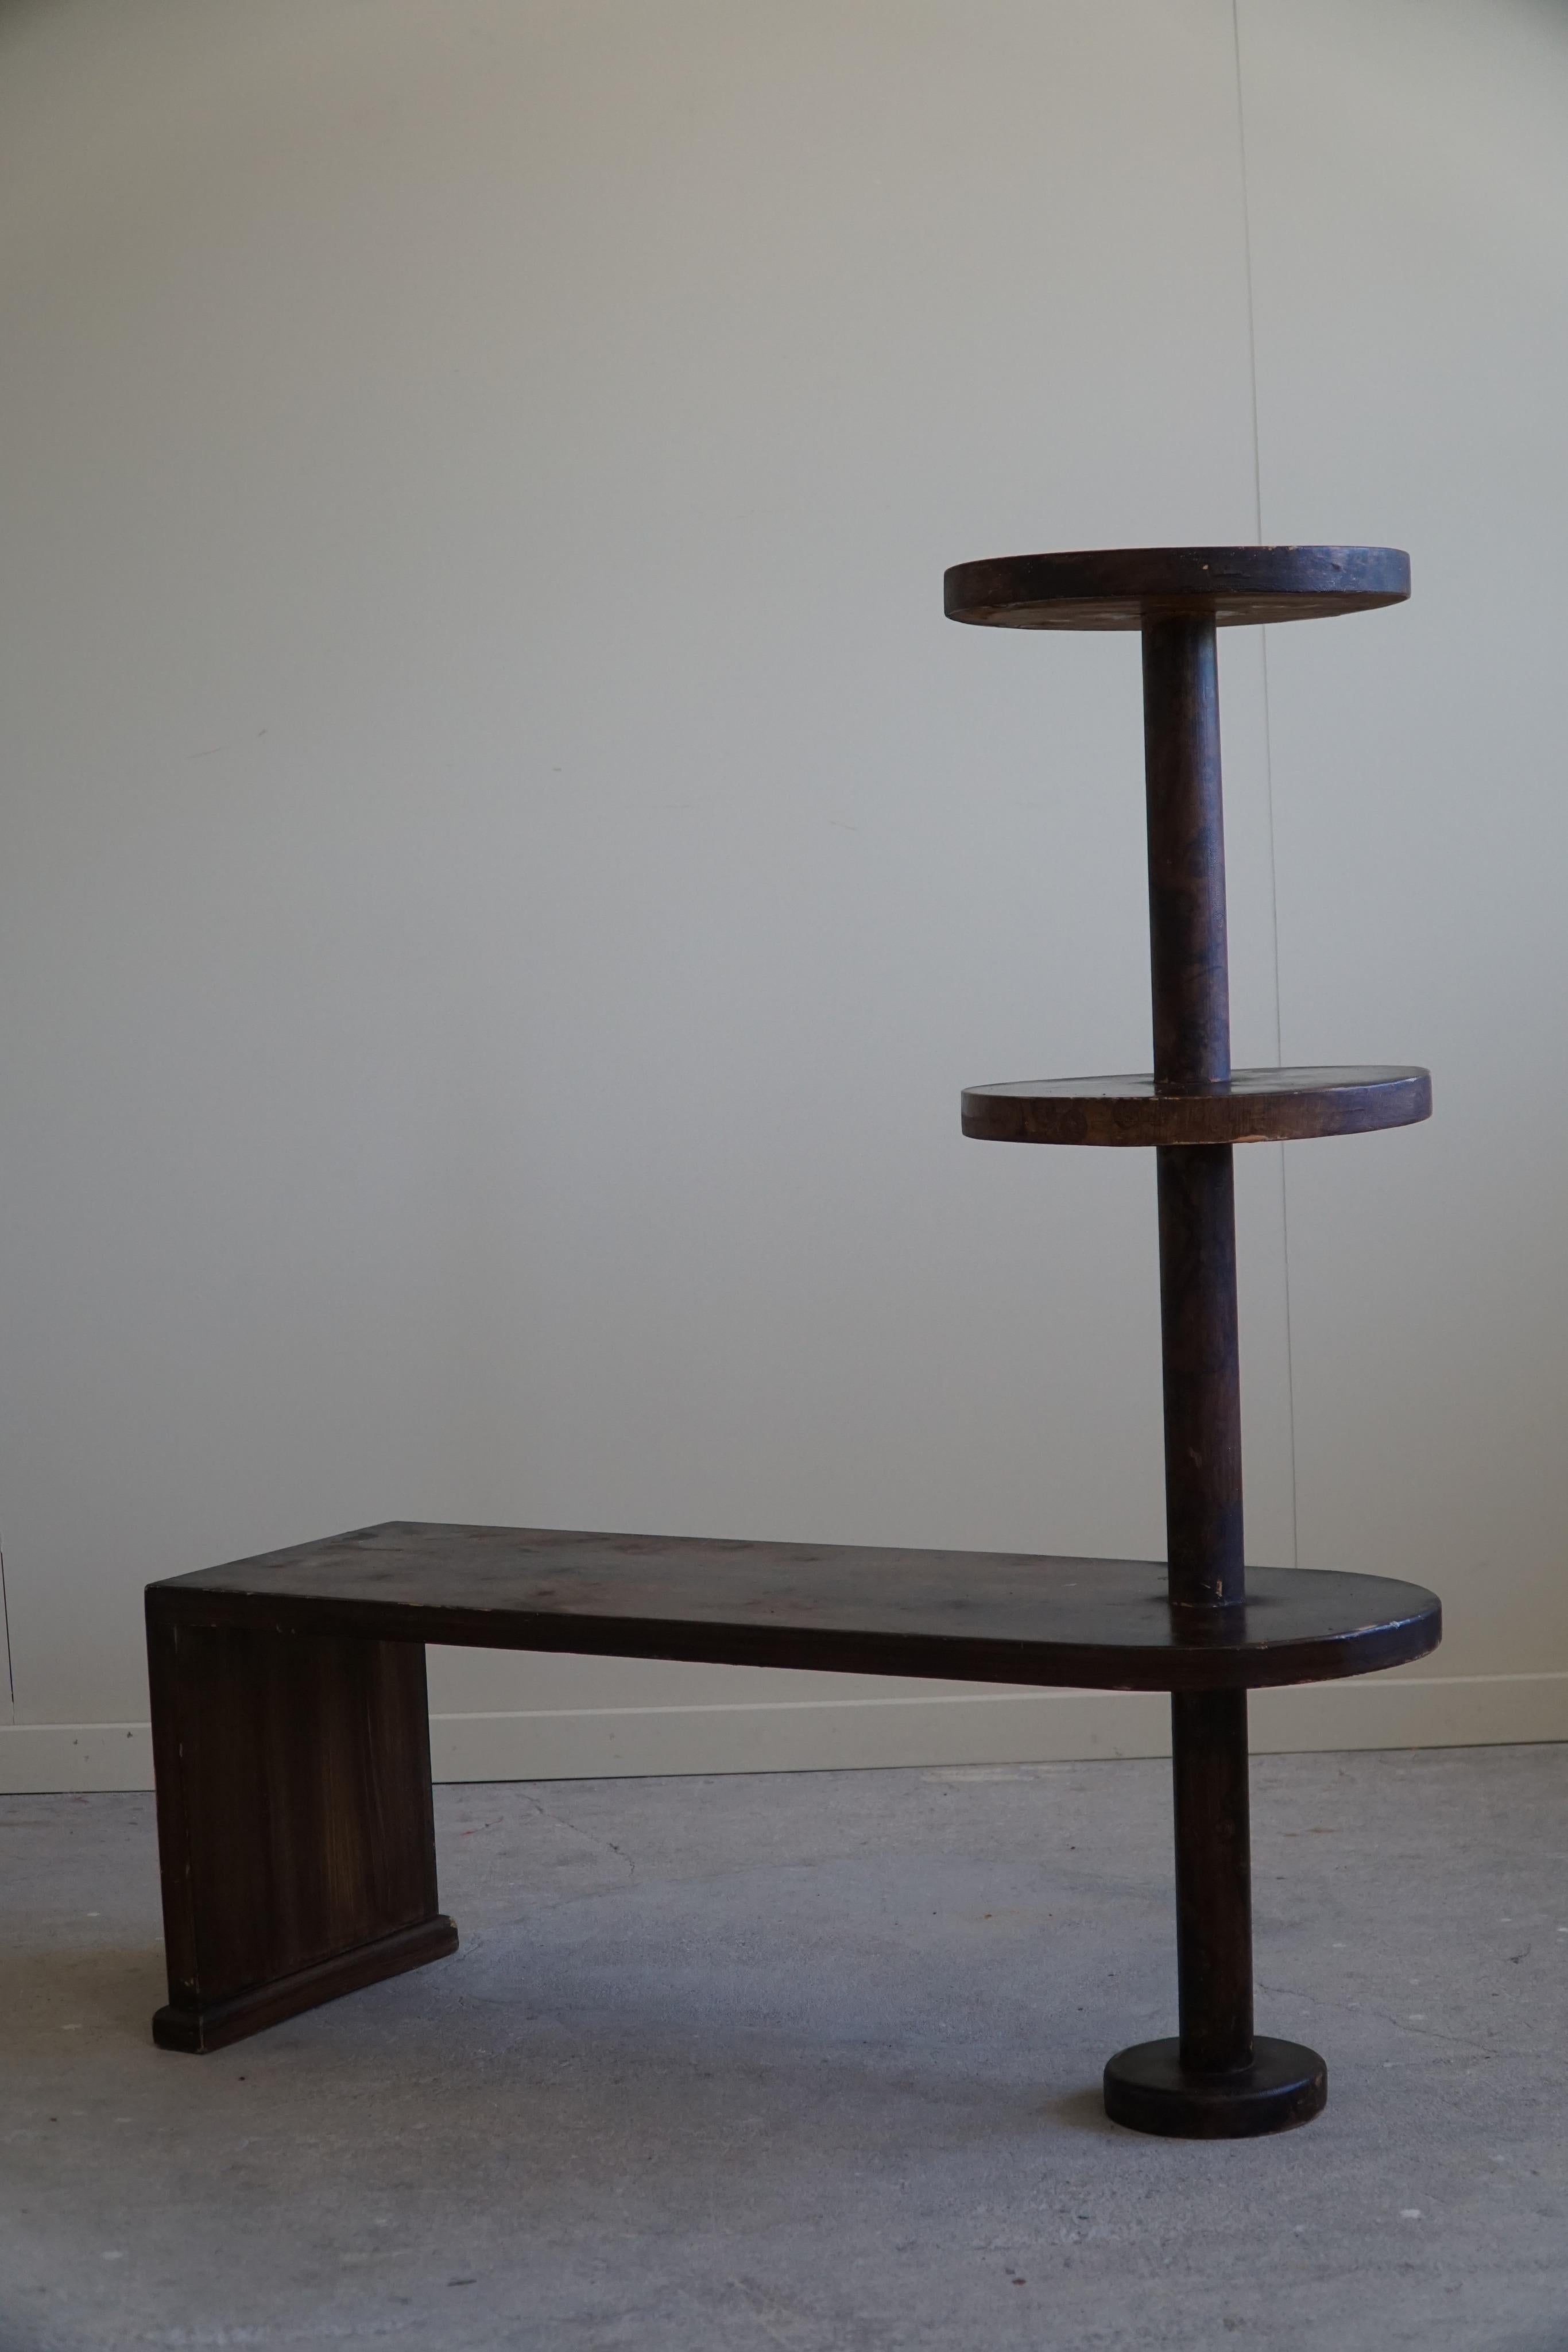 Decorative and Multifunctional Side Table / Pedestal, Danish Art Deco, 1940s For Sale 2